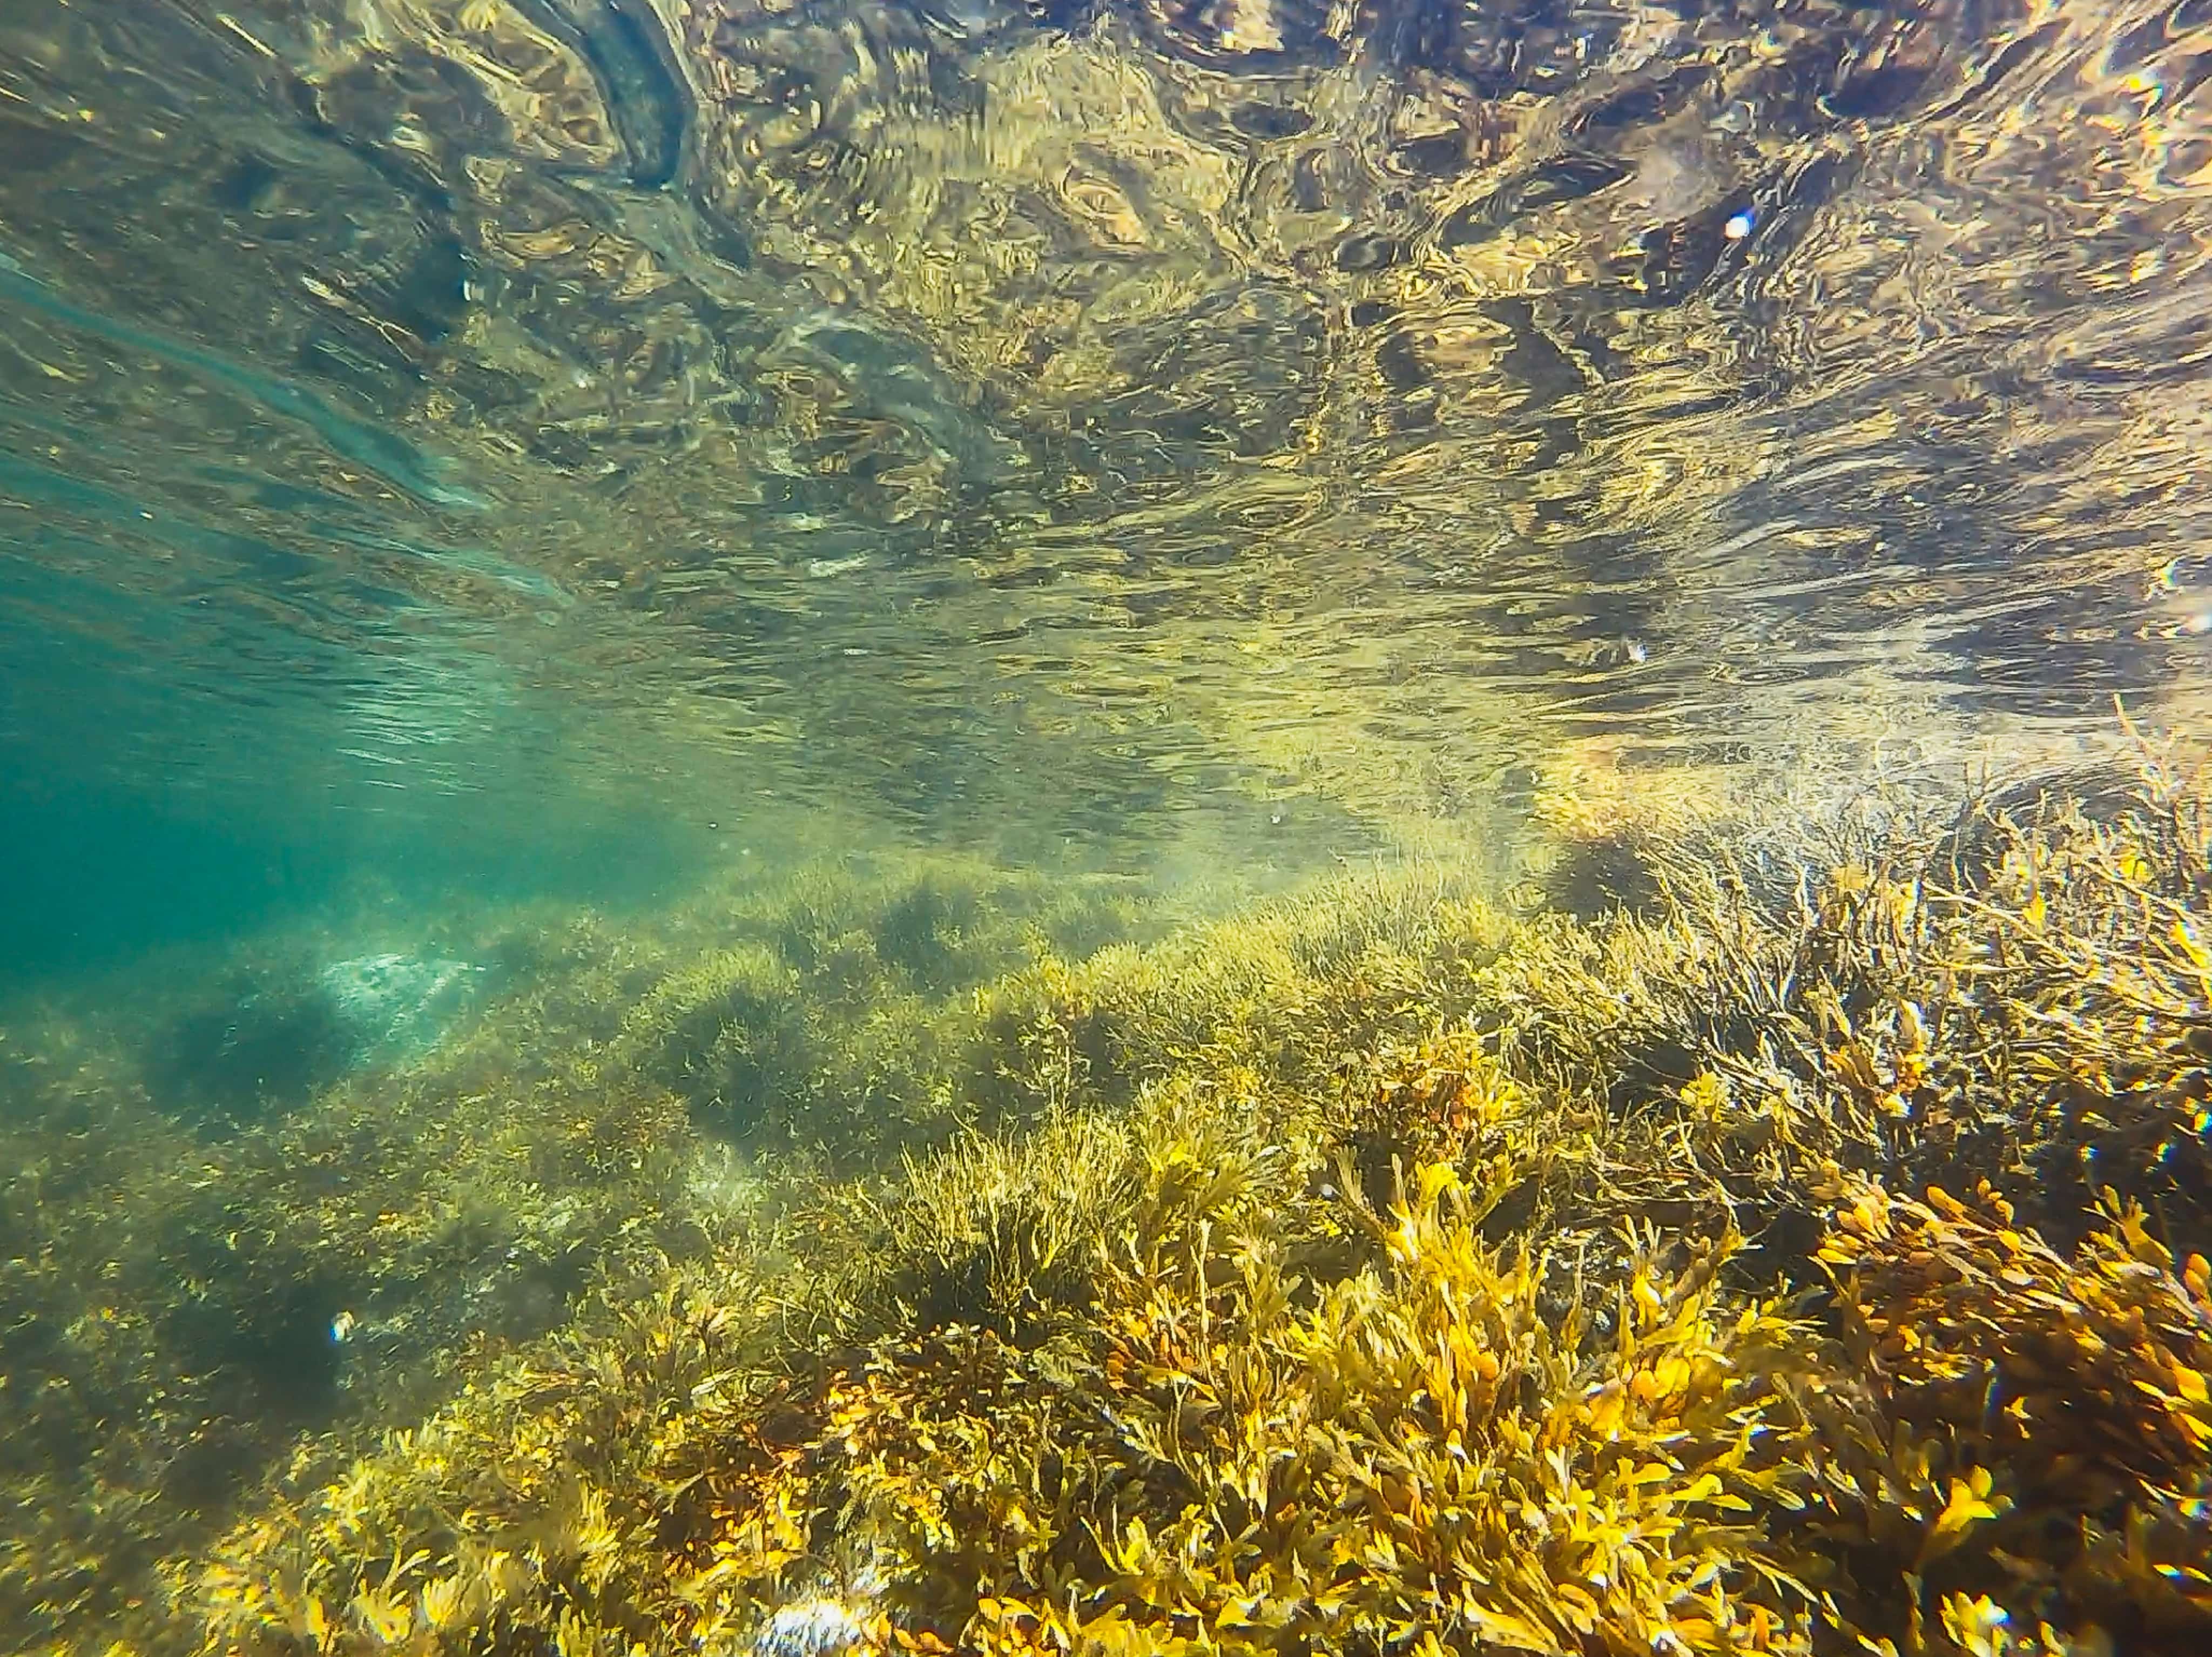 Underwater image of the sea bed with seaweed